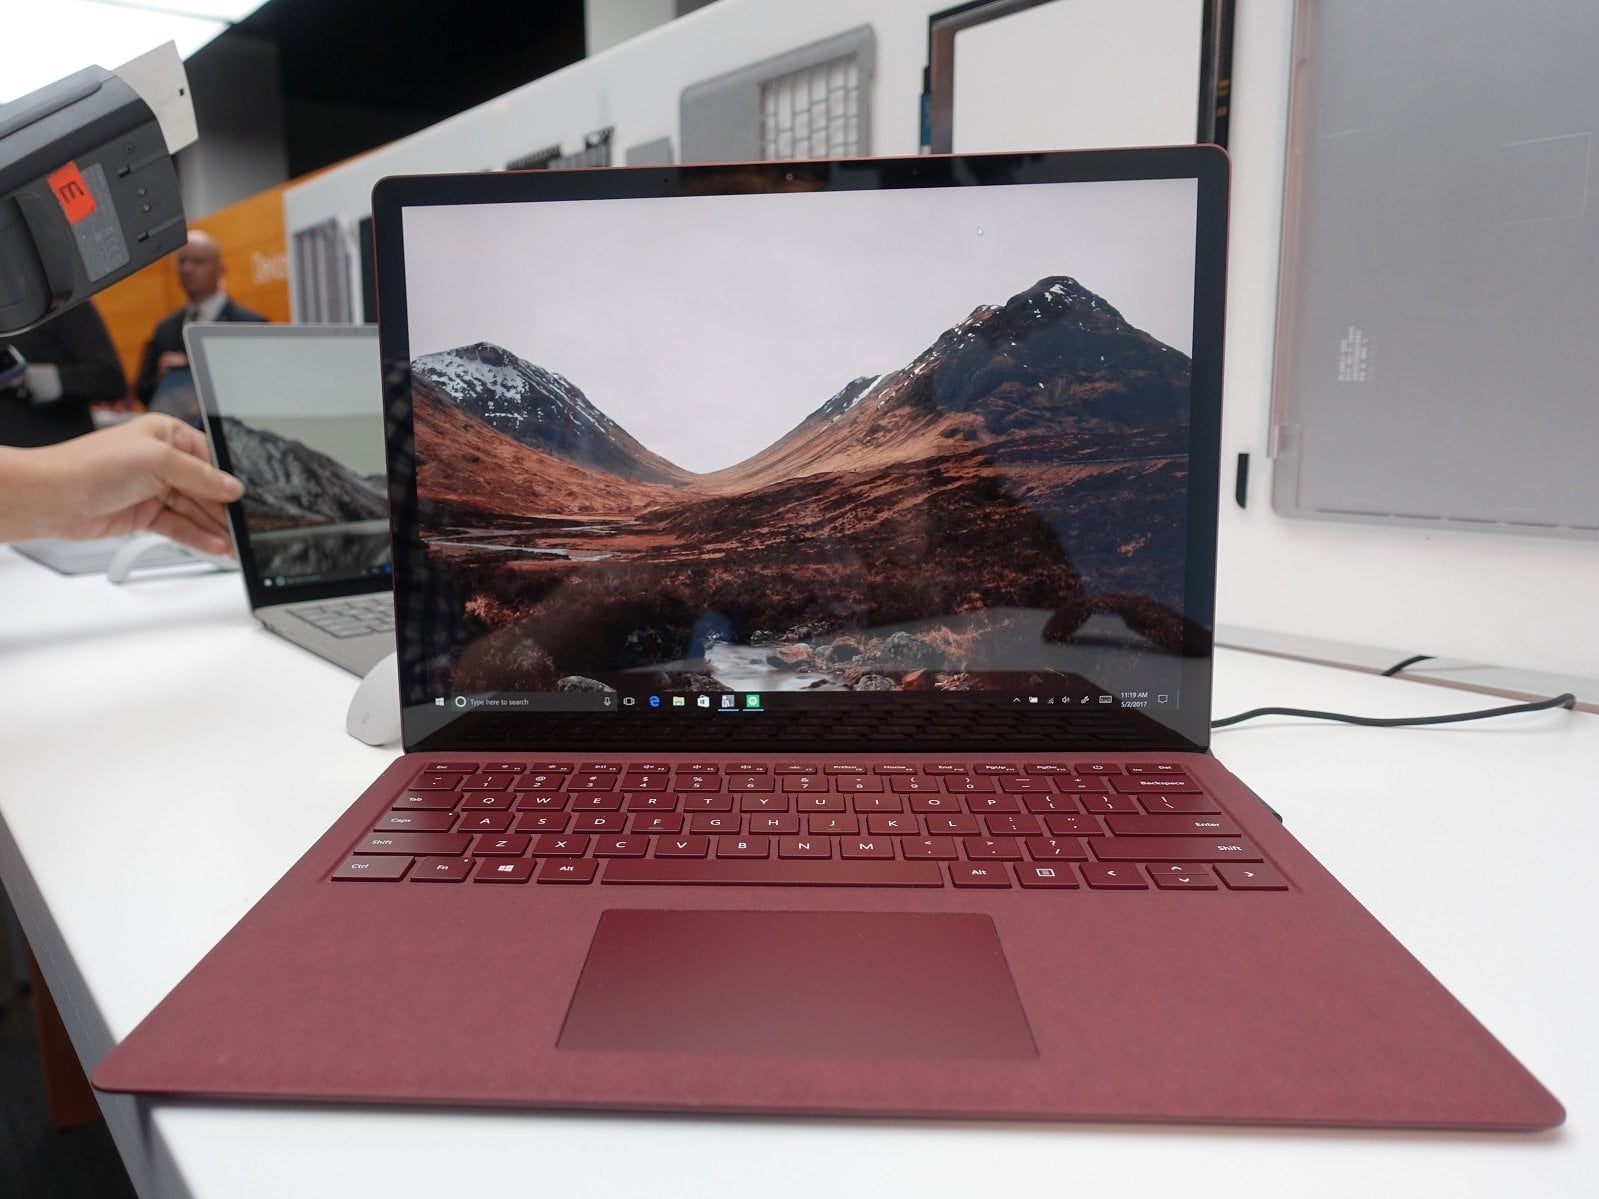 Following up on the declaration of the Windows 10 S, Microsoft revealed an all new-fangled Surface Laptop to go along with it. It’s hard to notify what